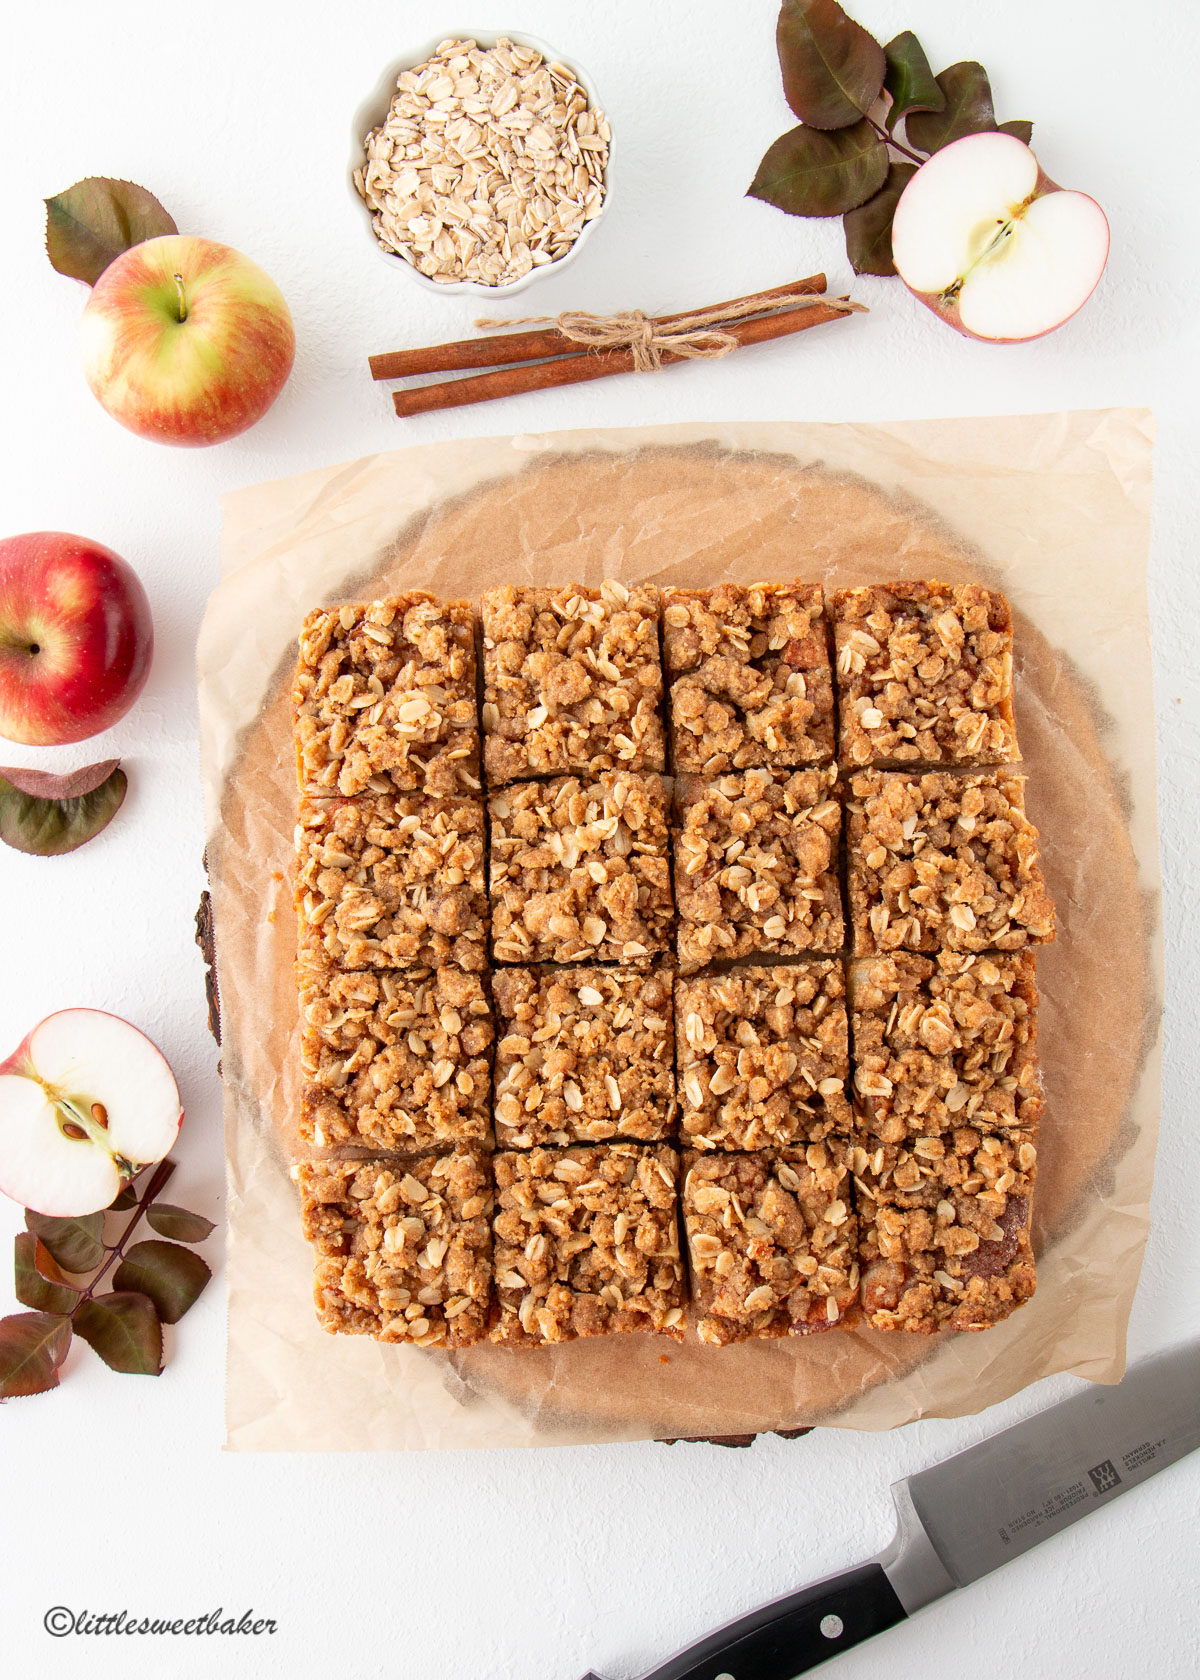 Overhead view of apple crisp bars on a sheet of parchment paper and wooden board.